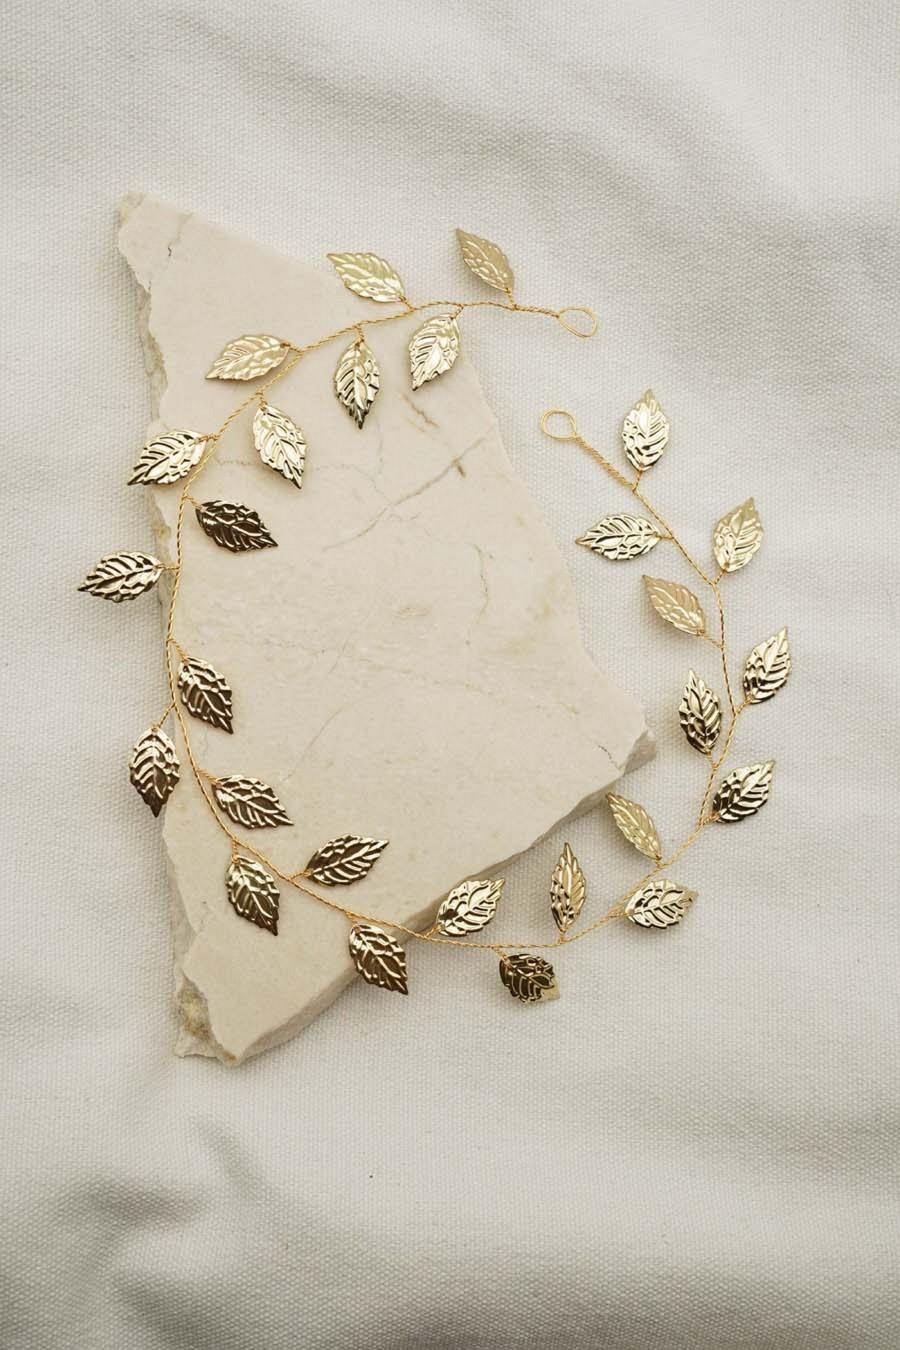 Mariage - Copper Leaf Branch Style Hair Vine Wedding Headpiece * Gold, Silver Available *